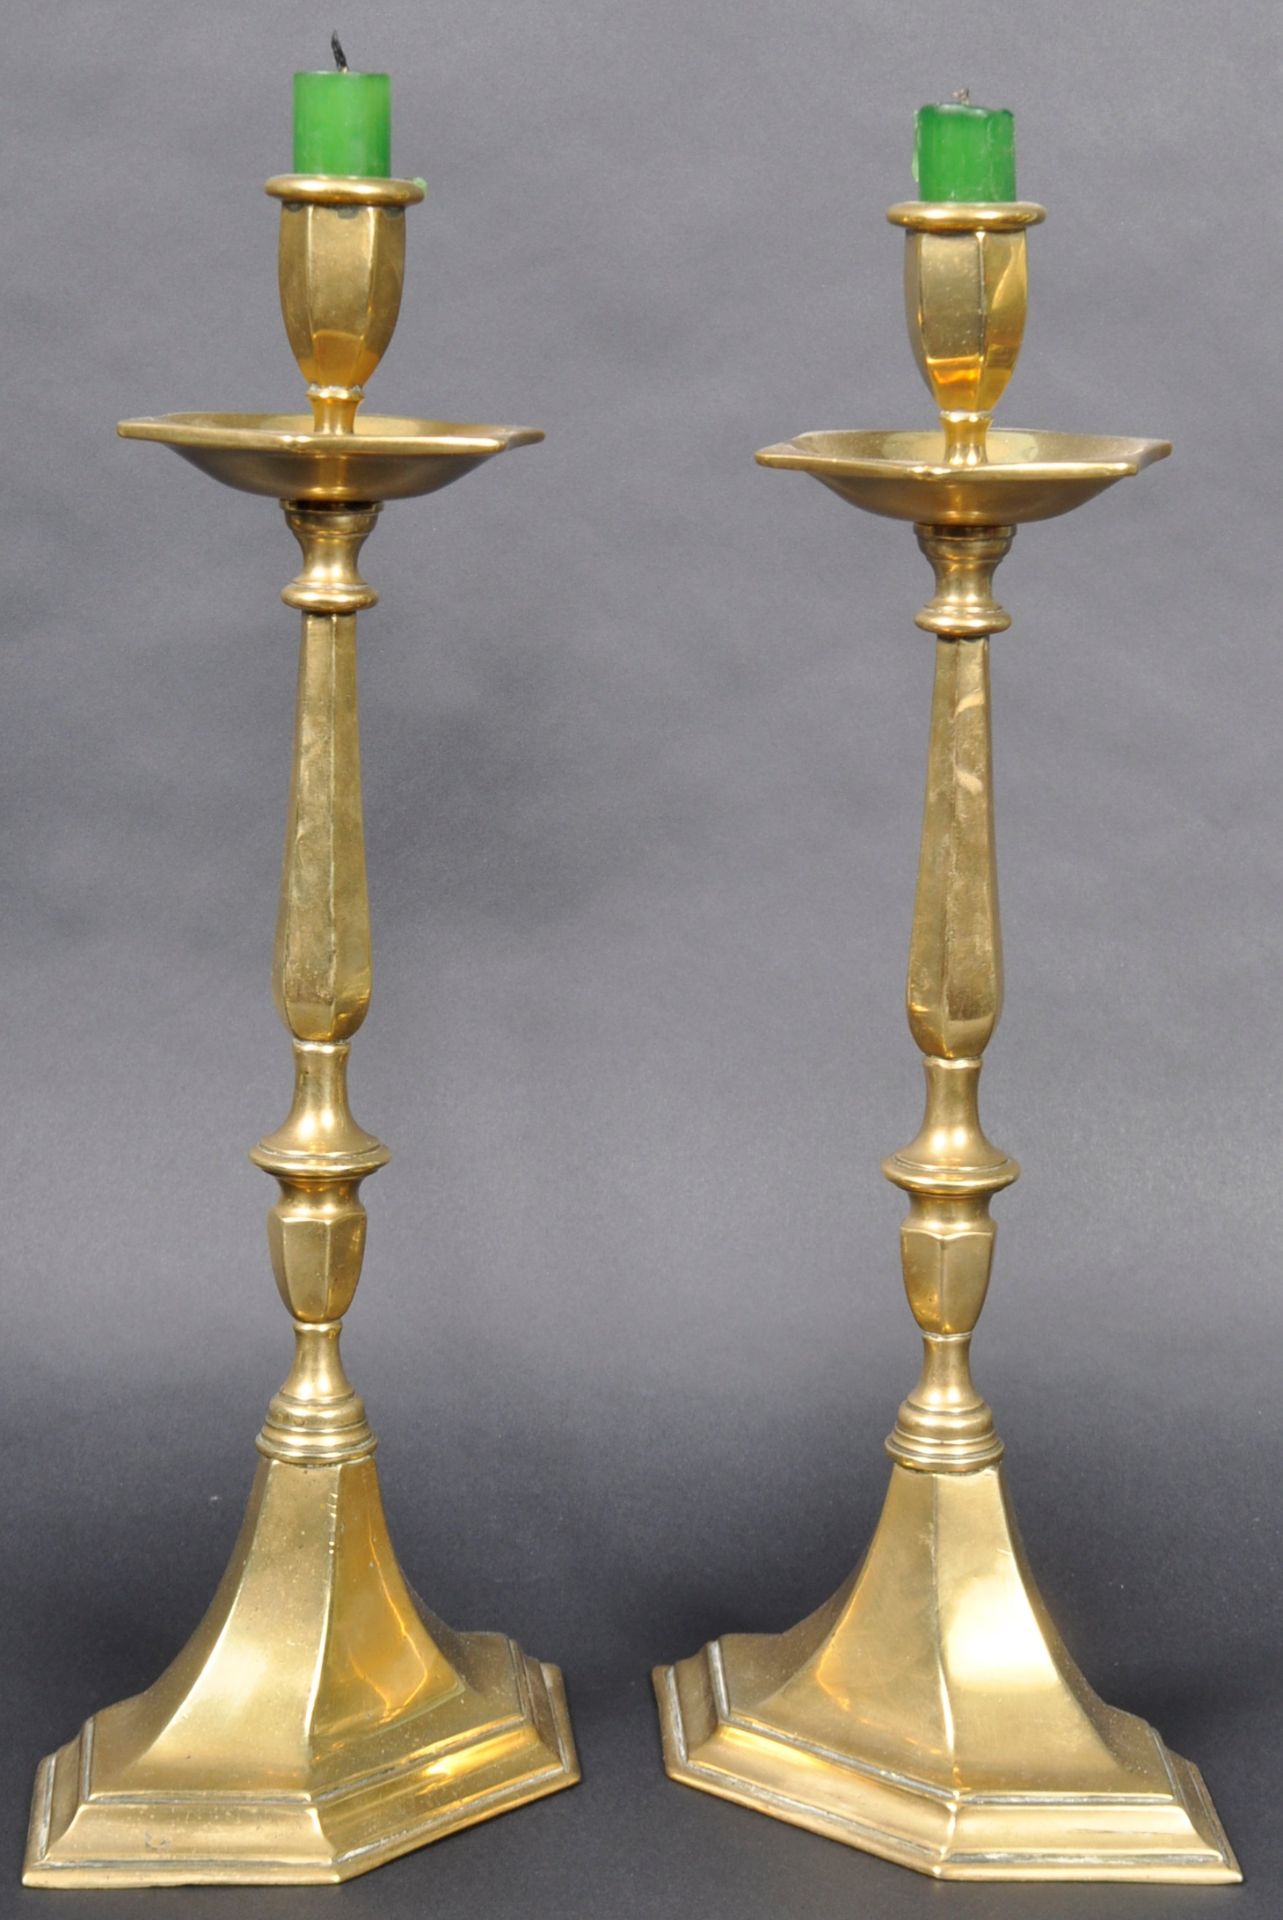 PAIR OF EARLY 20TH CENTURY BRASS CANDLESTICKS - Image 7 of 8